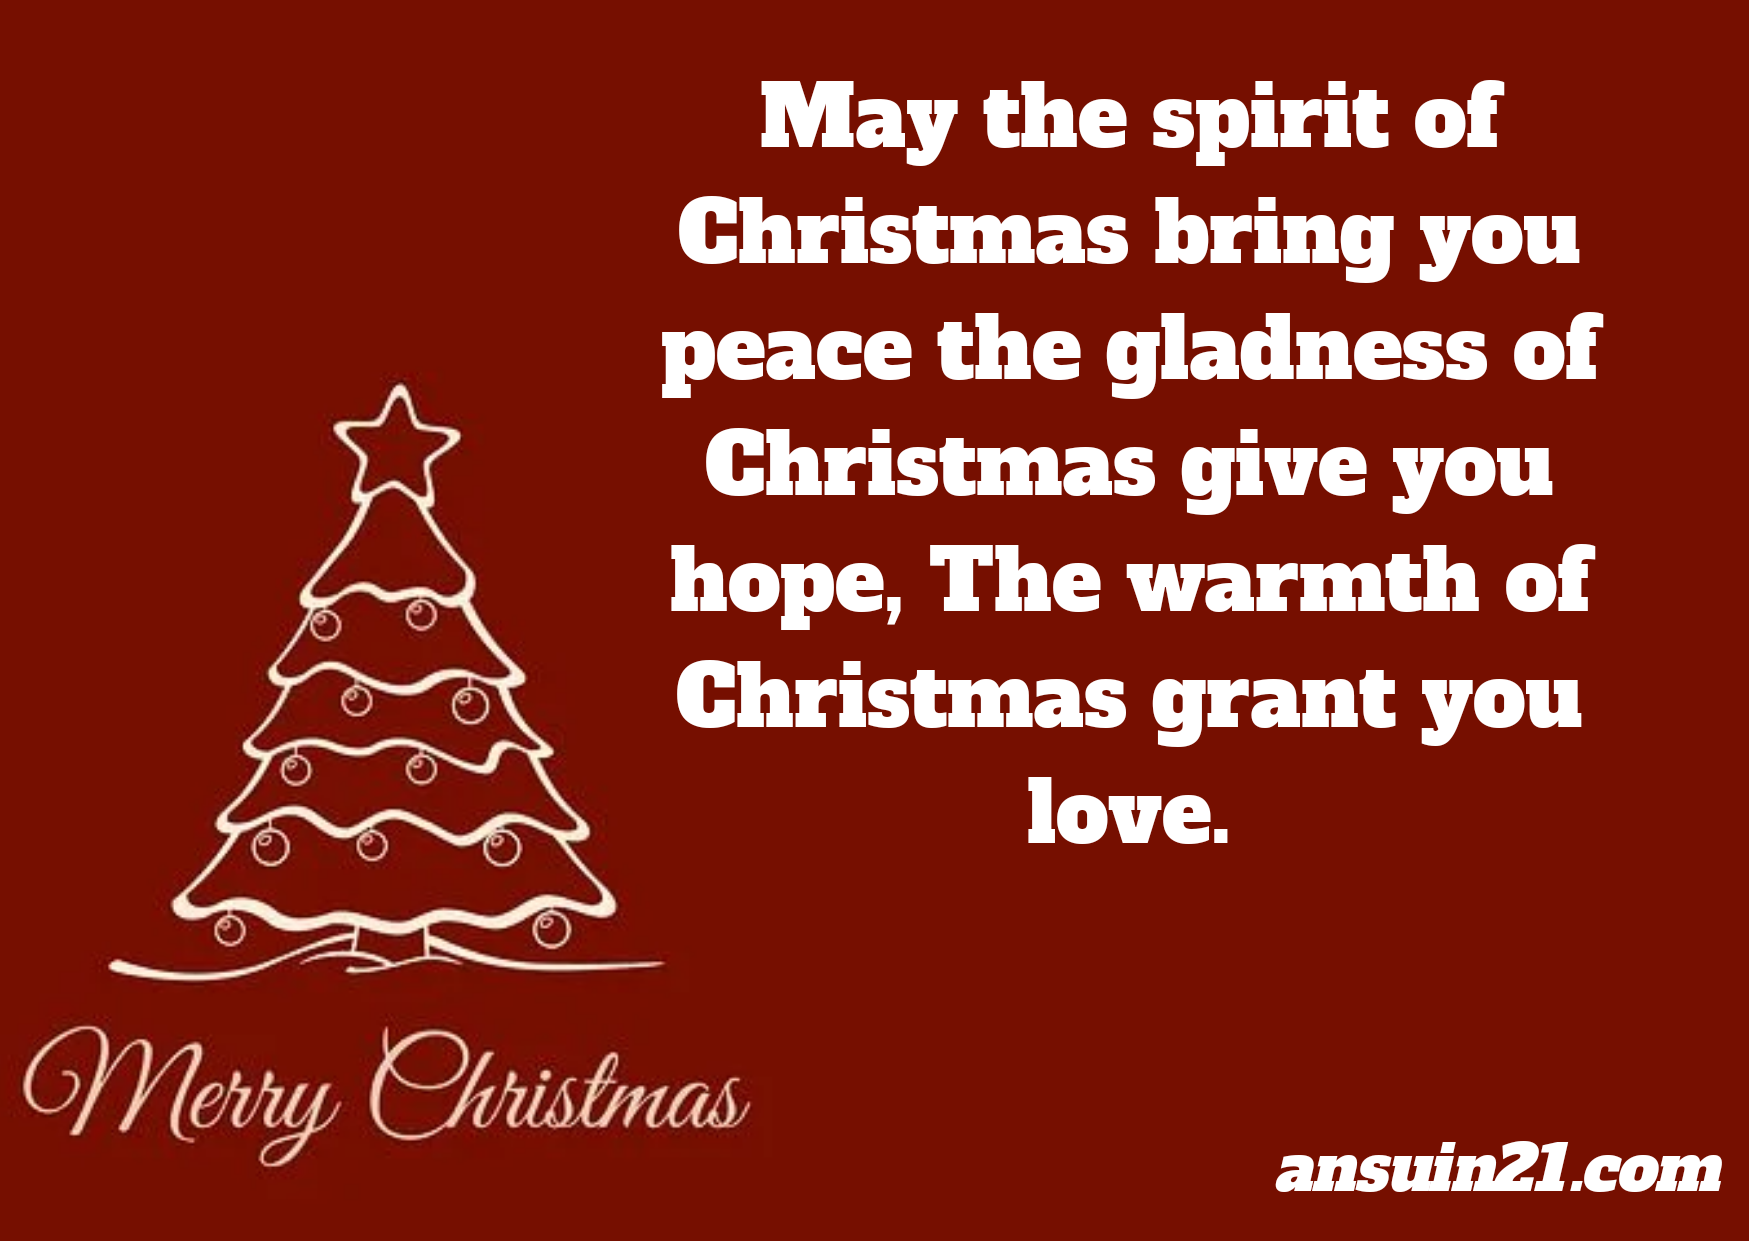 Merry Christmas Wishes, Images, Status, Quotes,